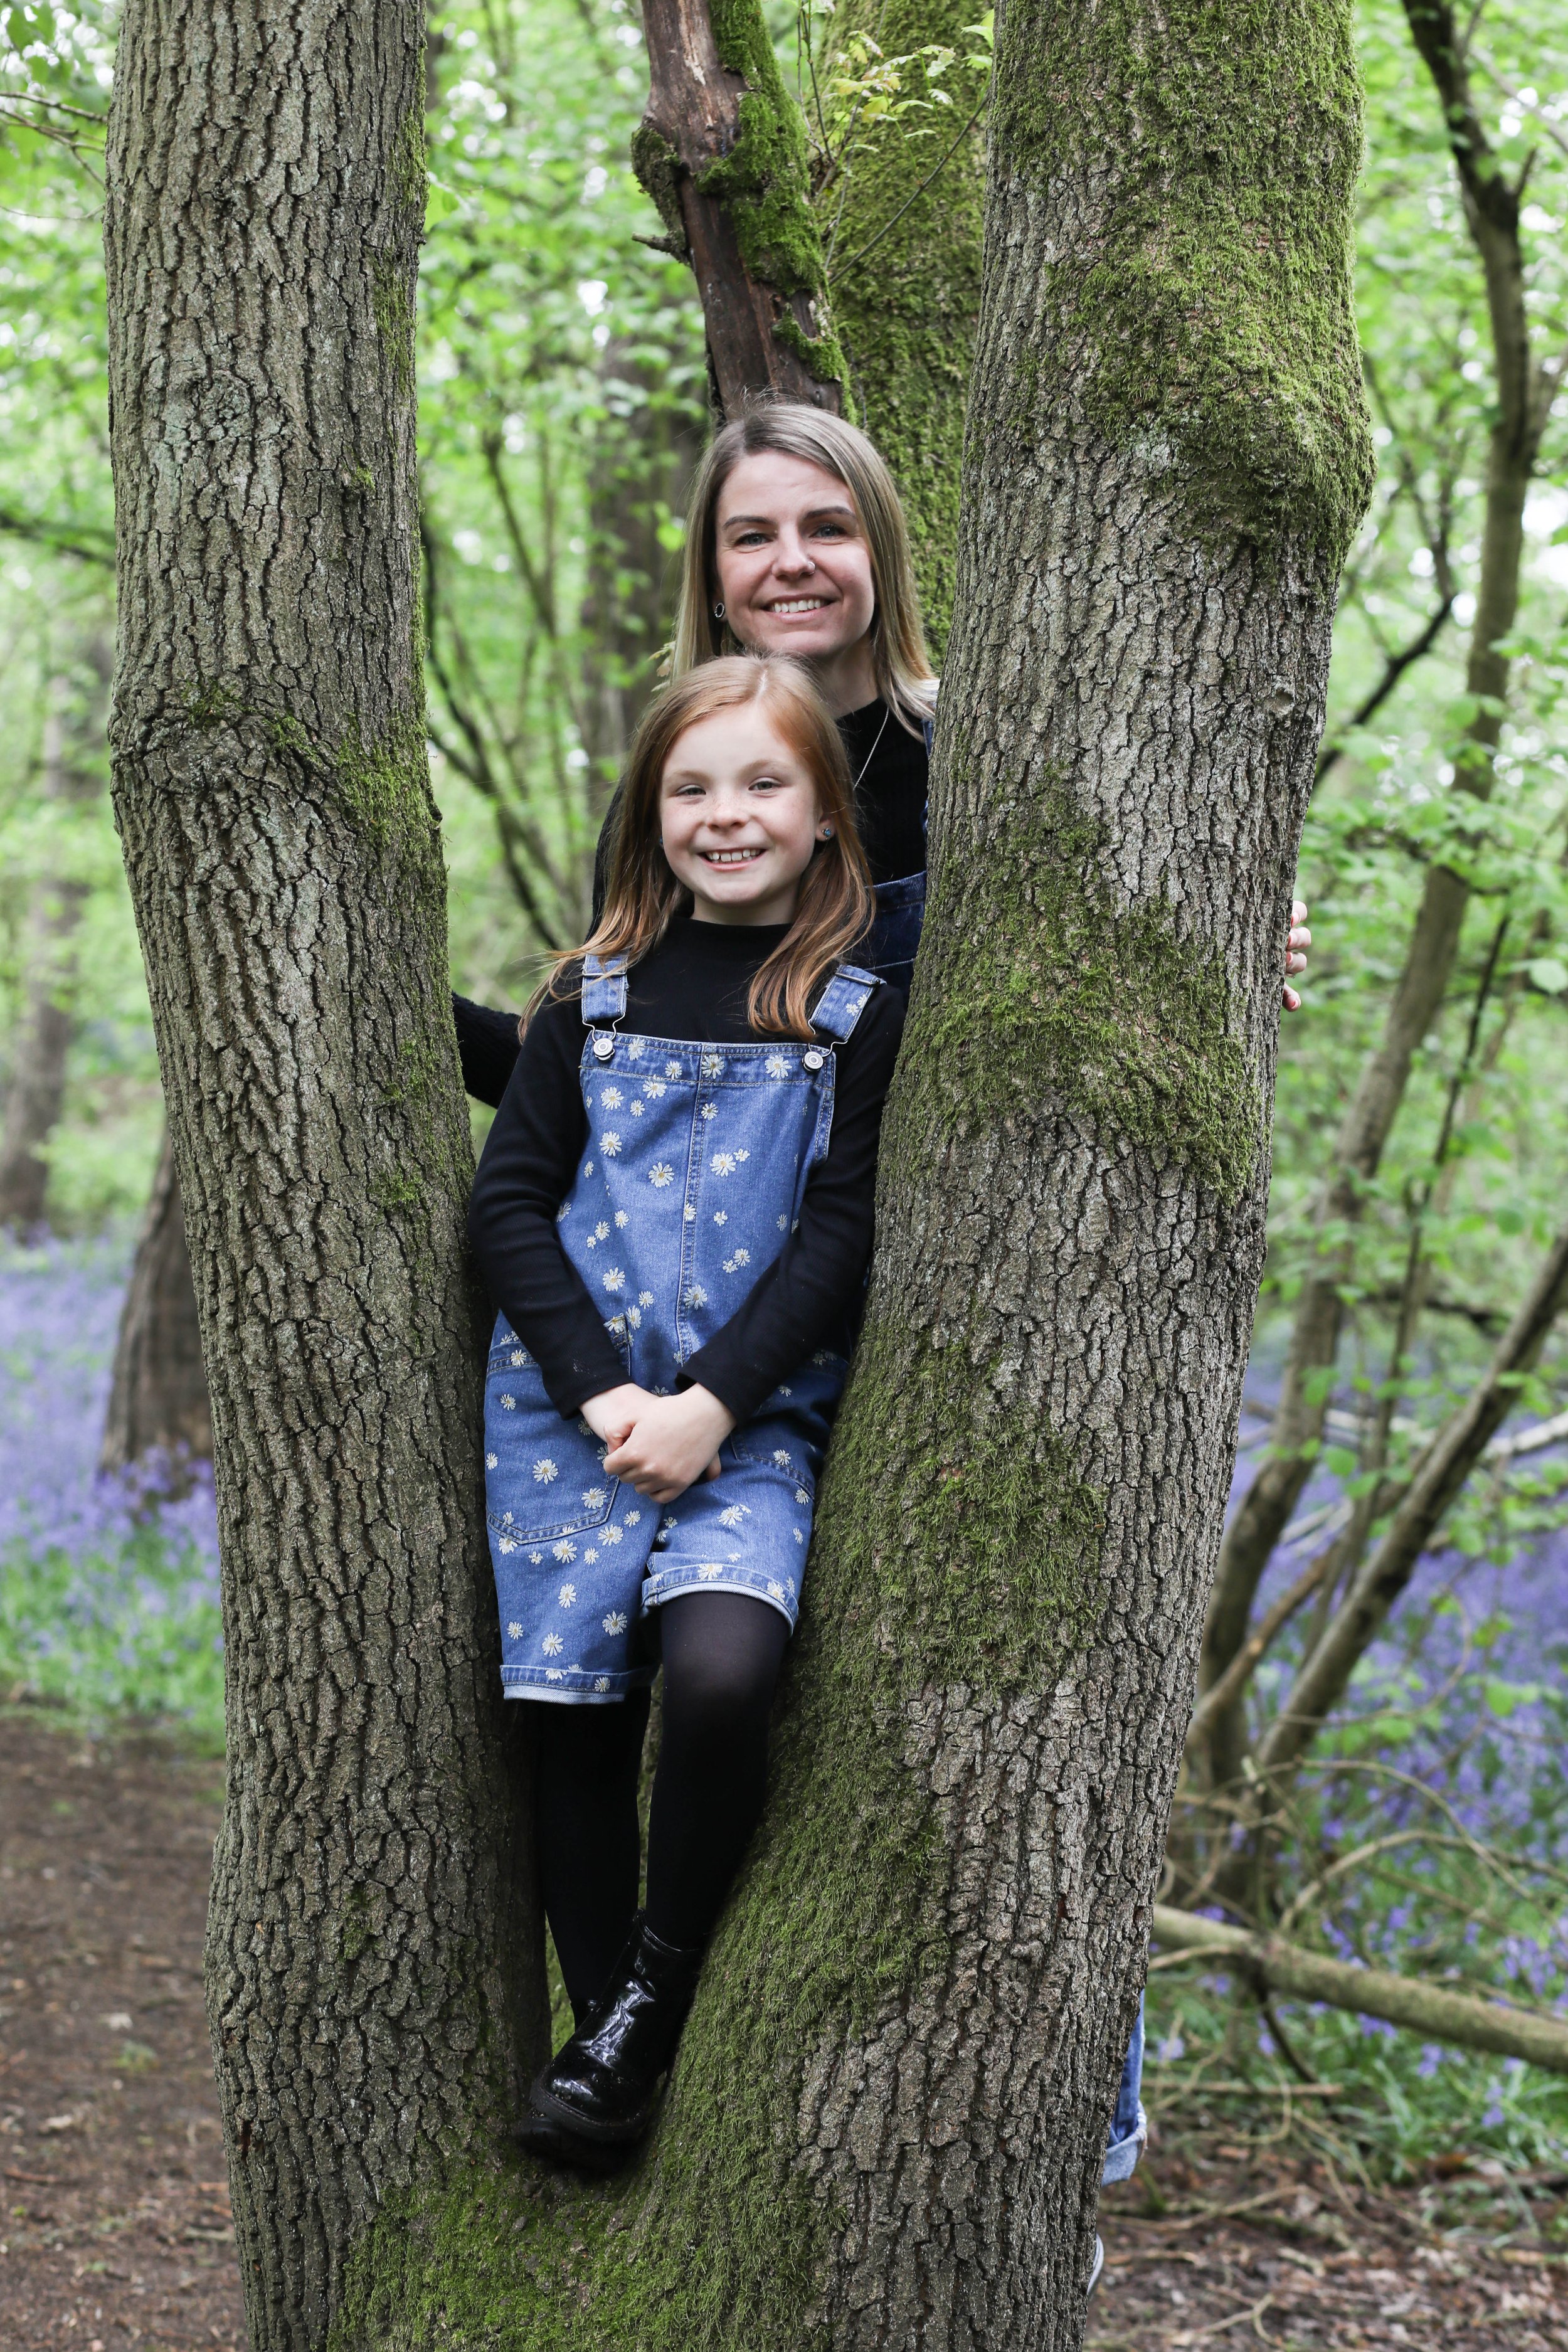 MUM AND DAUGHTER PHOTO SHOOT IN THE BLUEBELLS | BERKSHIRE PORTRAIT SHOOTS48 choice .JPG